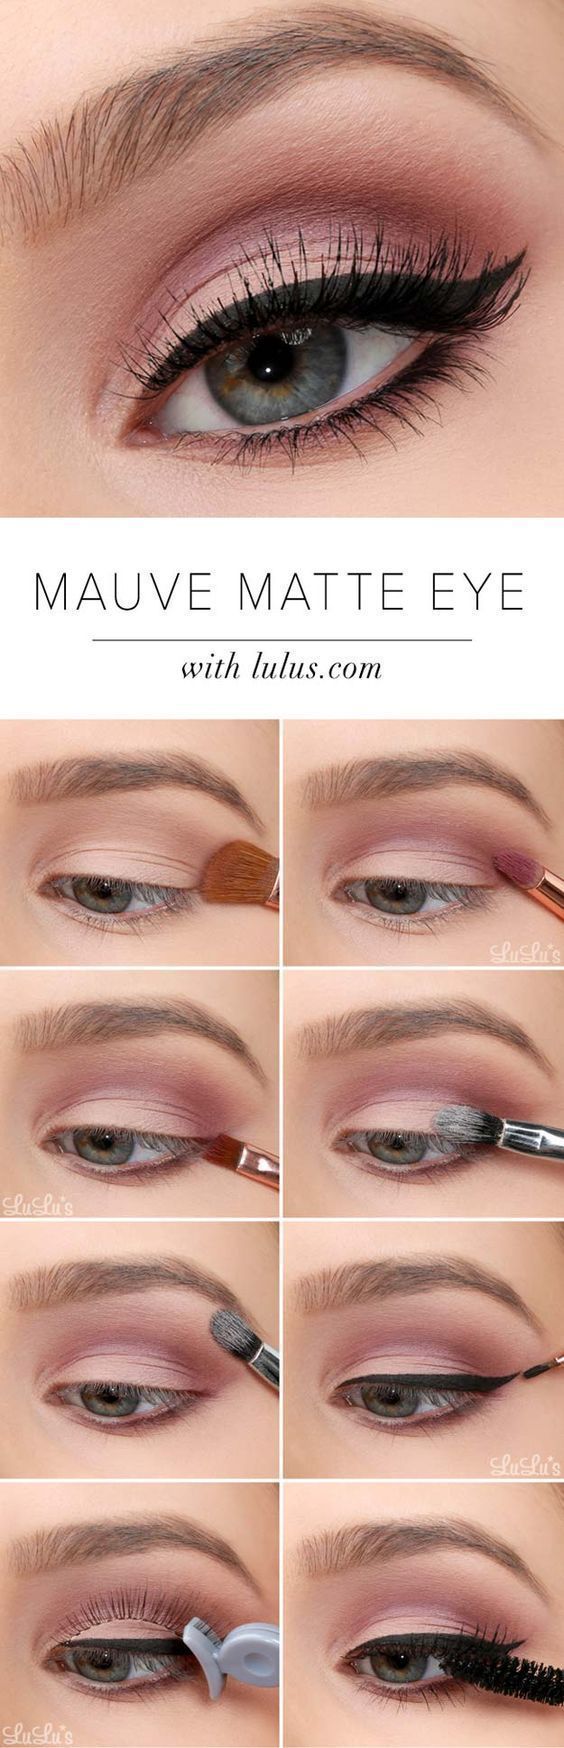 Sexy Eye Makeup Tutorials - Mauve Matte Eye Tutorial - Easy Guides on How To Do ...